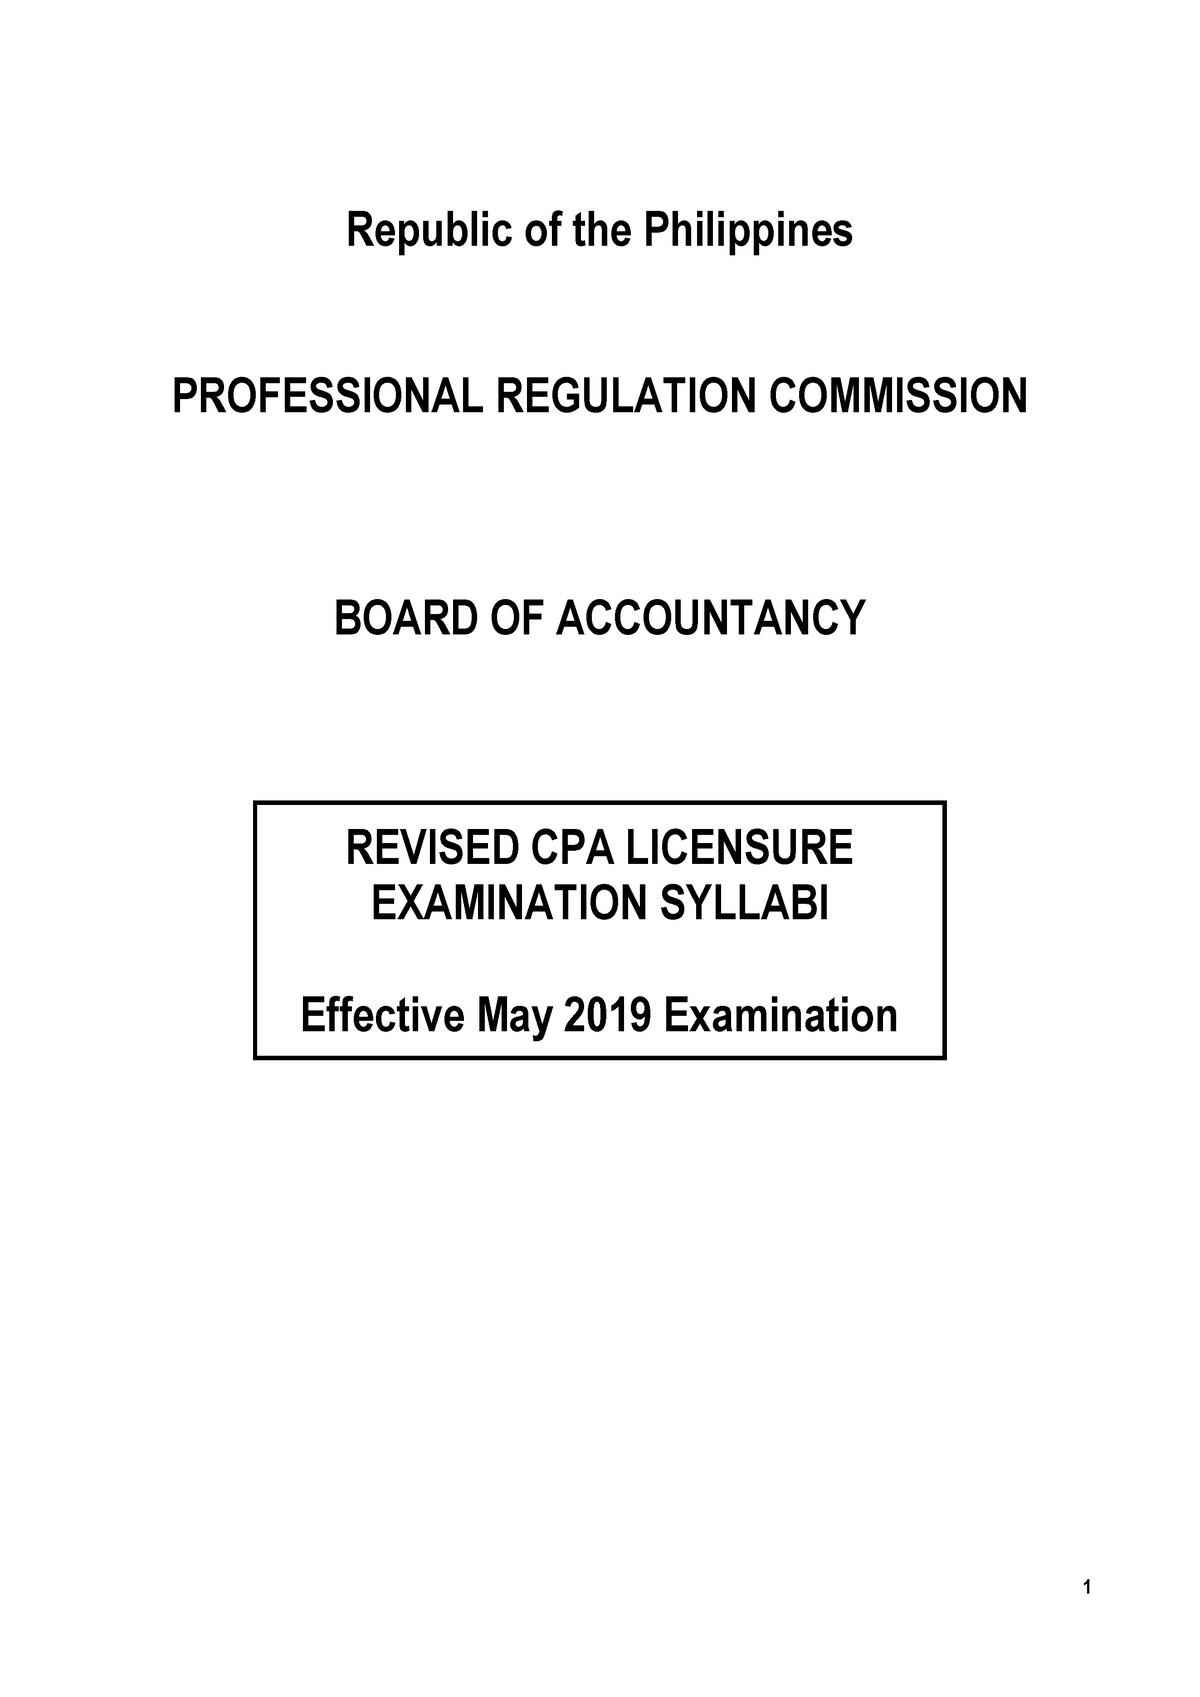 Revised CPA Board Exam Syllabi Republic of the Philippines